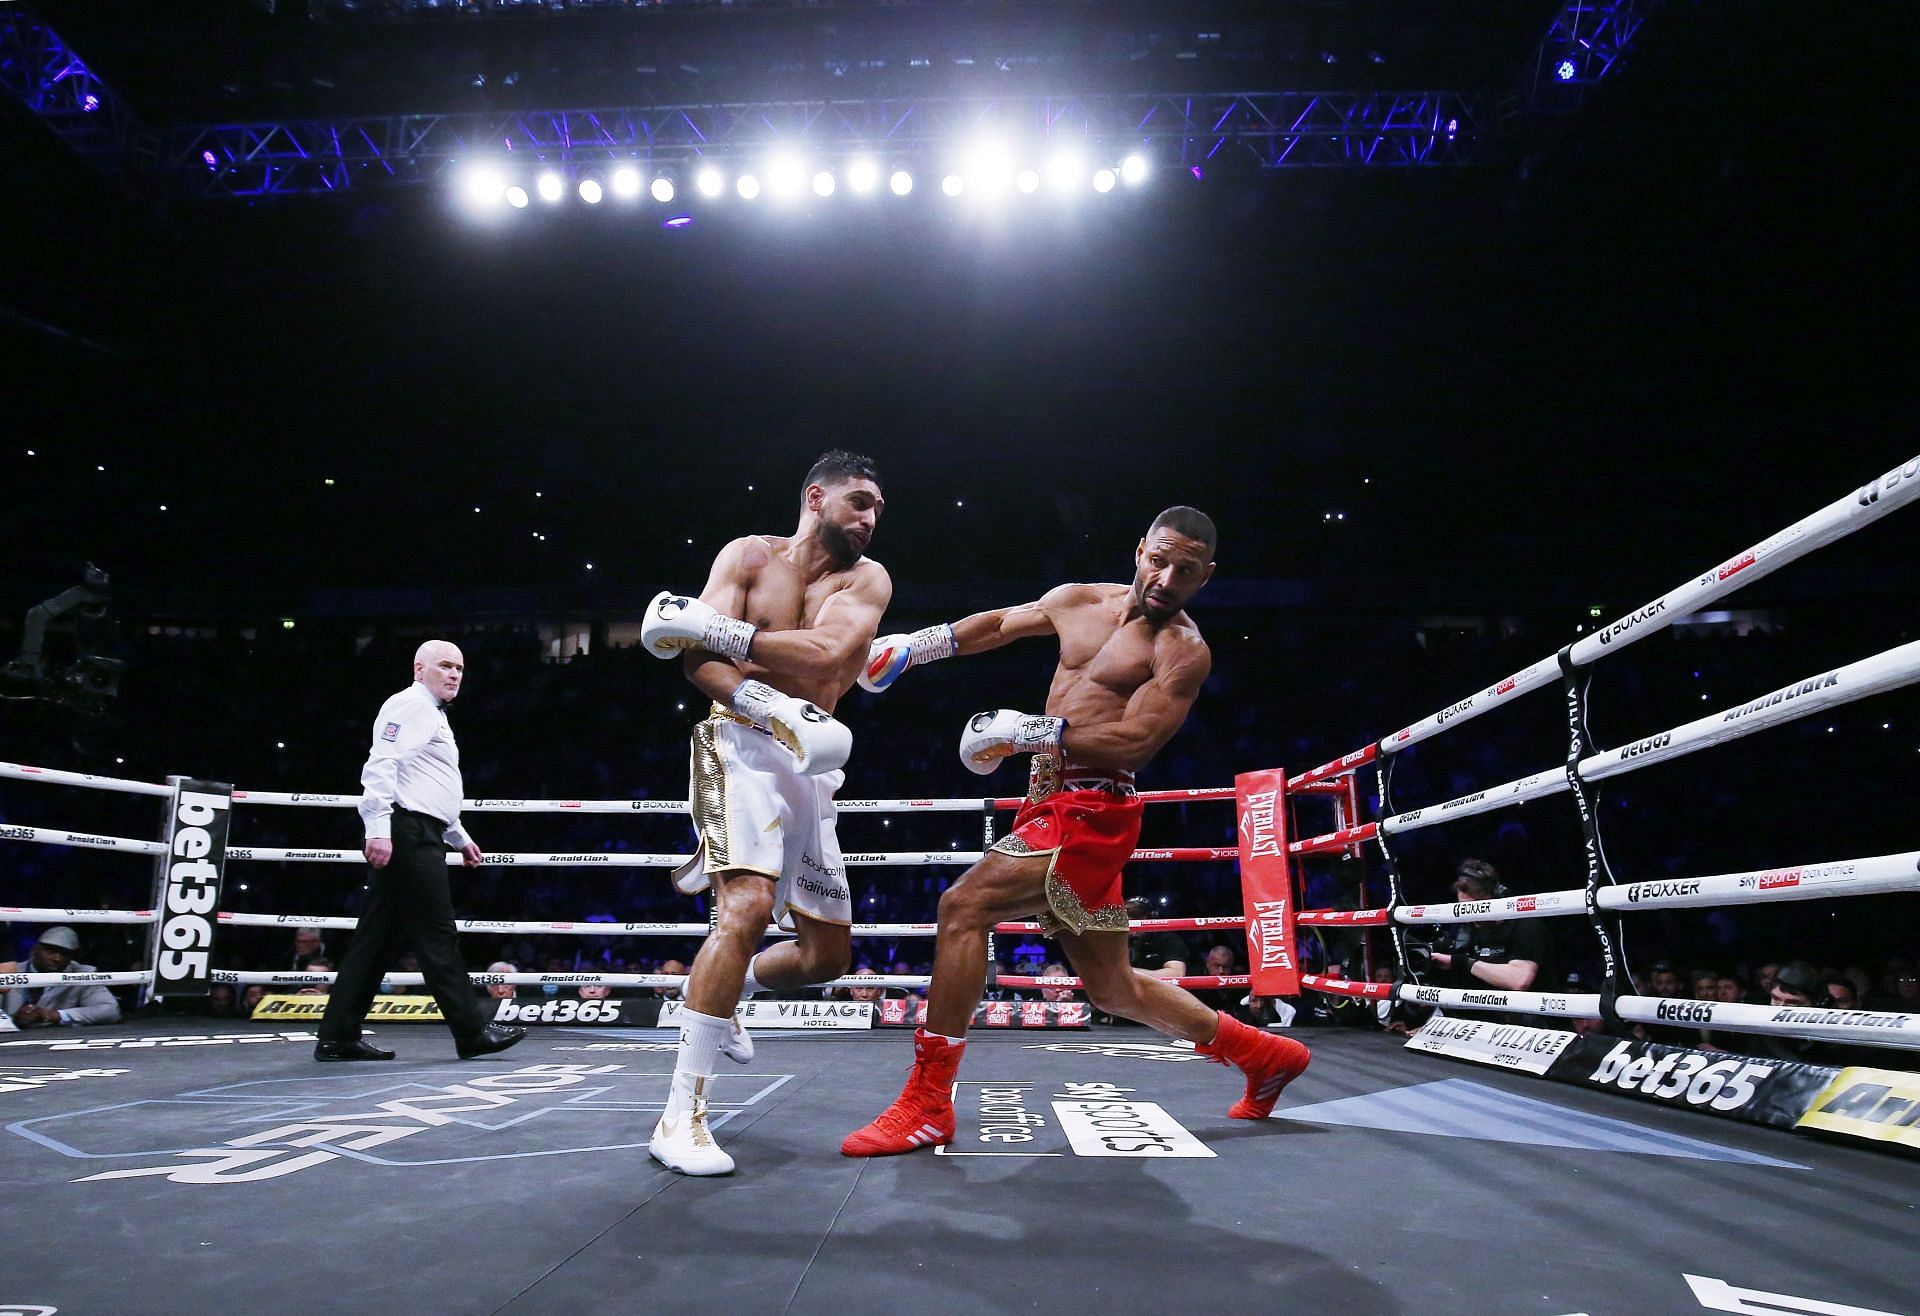 Amir Khan (L) was knocked out by Kell Brook (R) in their fight earlier this year.